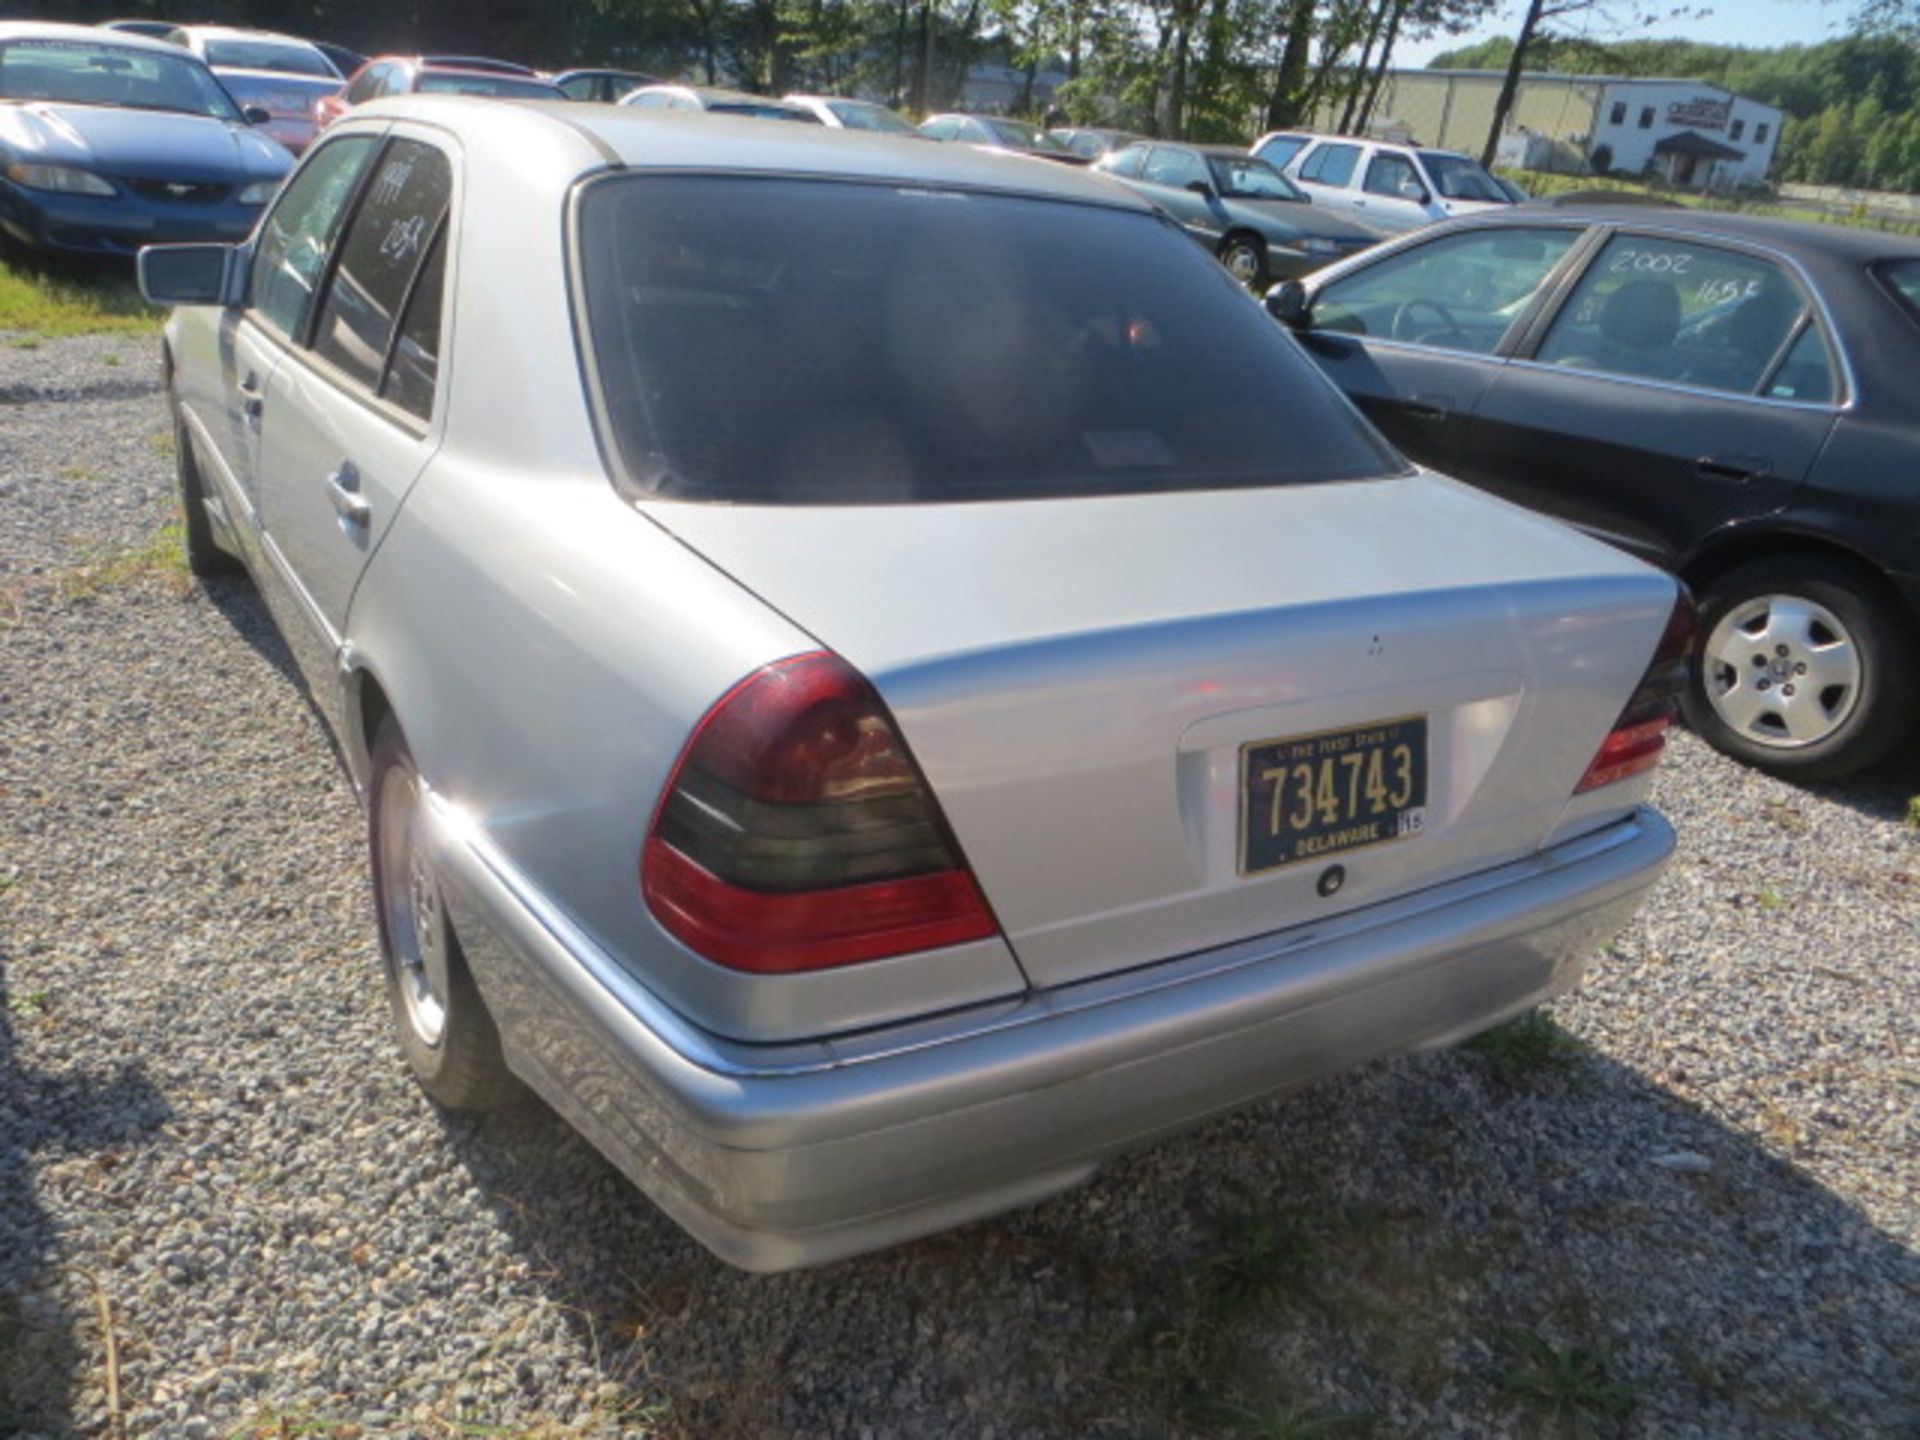 1999 Mercedes Benz C28-238000 MILES,VIN WDBHA29G5XA797344, SOLD WITH GOOD TRANSFERABLE TITLE, NO KEY - Image 3 of 3